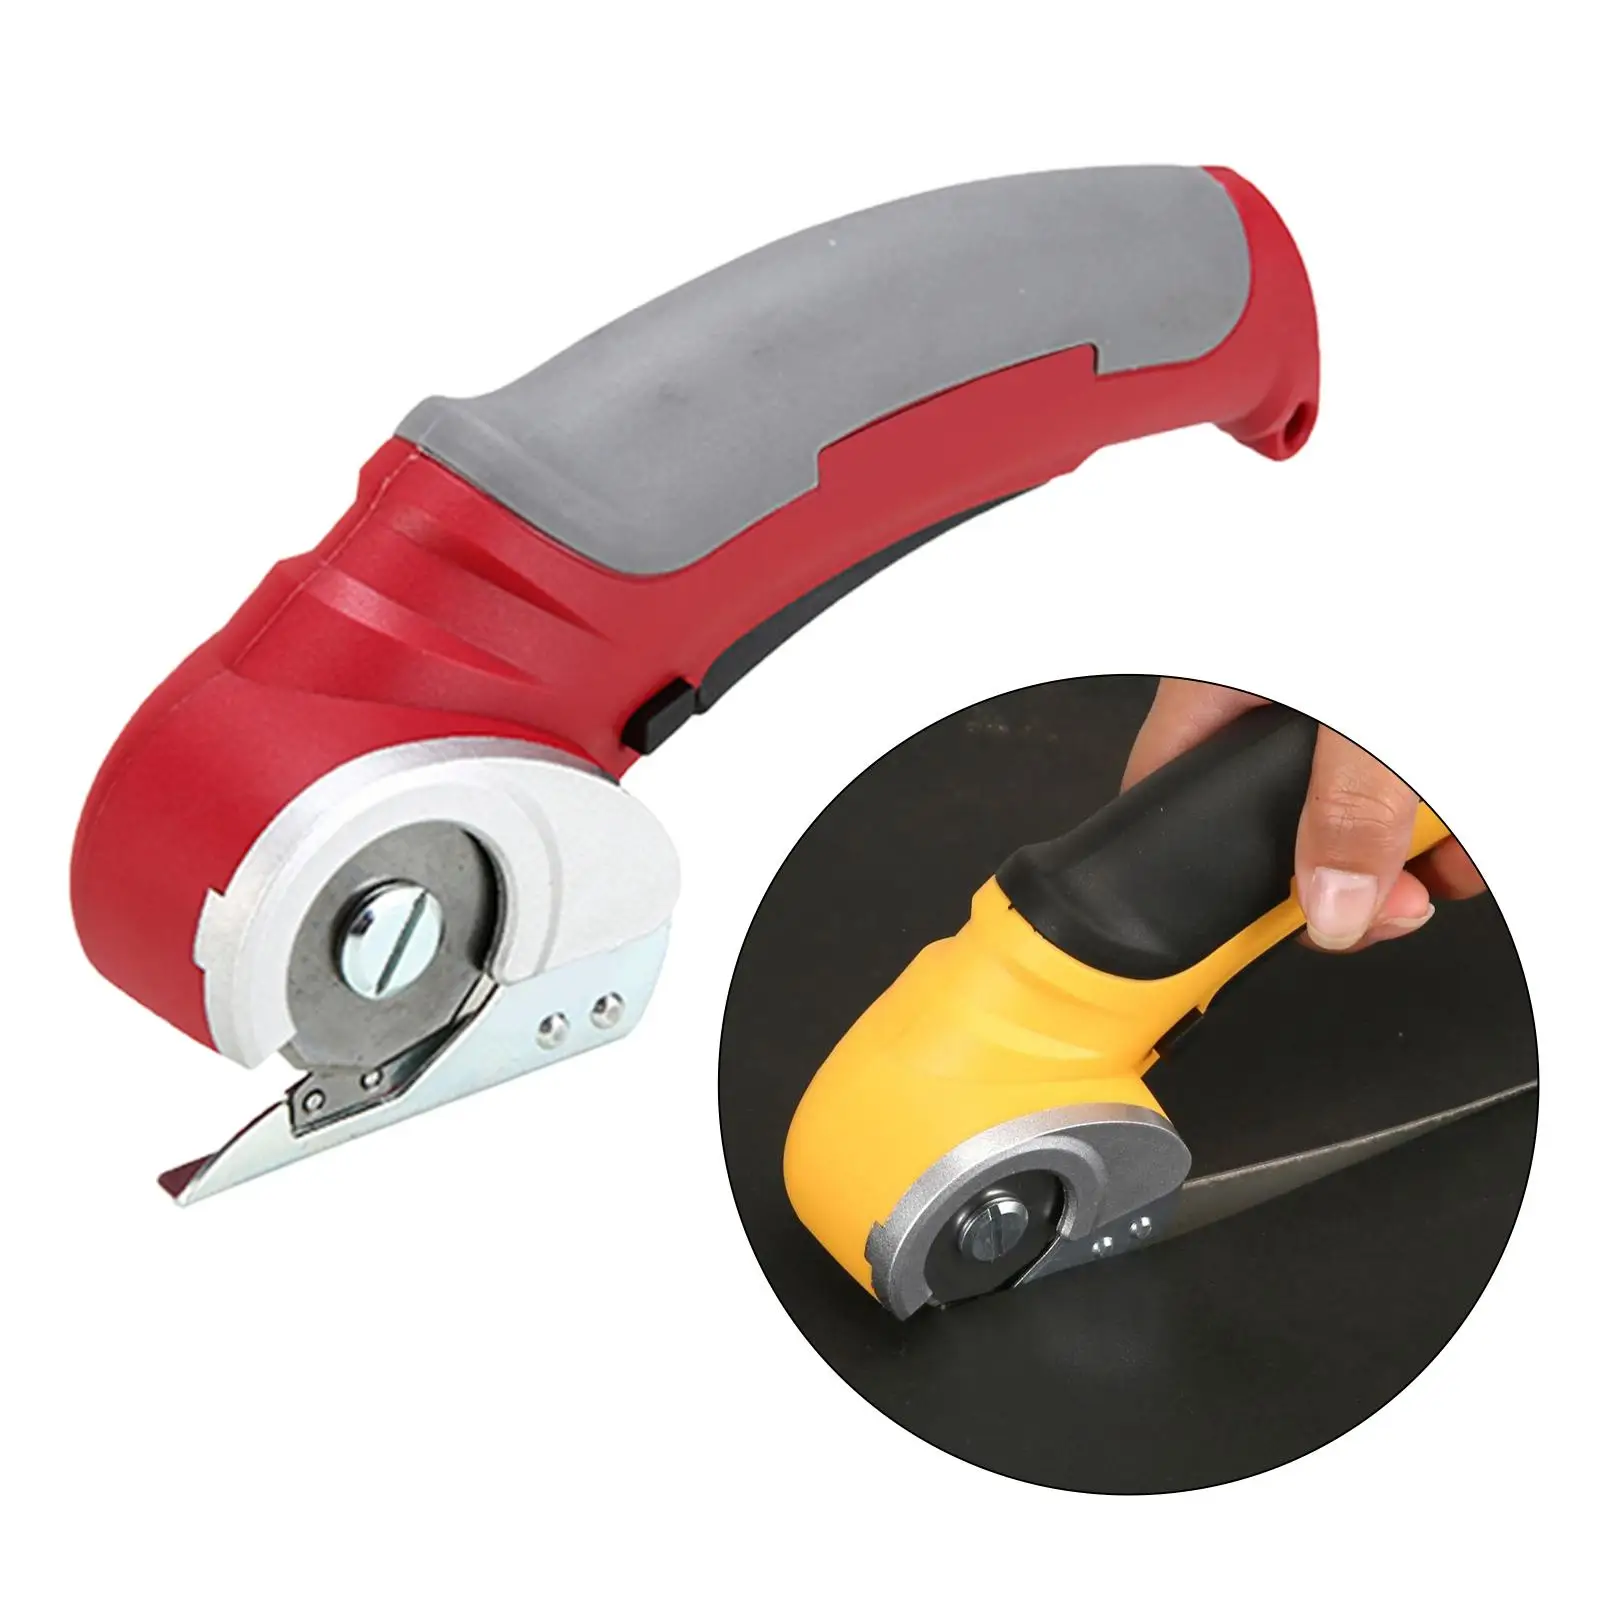 Cordless Electric Scissors Cutter USB Charging Small Tools Accessories Shear Leather Rug Cutting Fabric